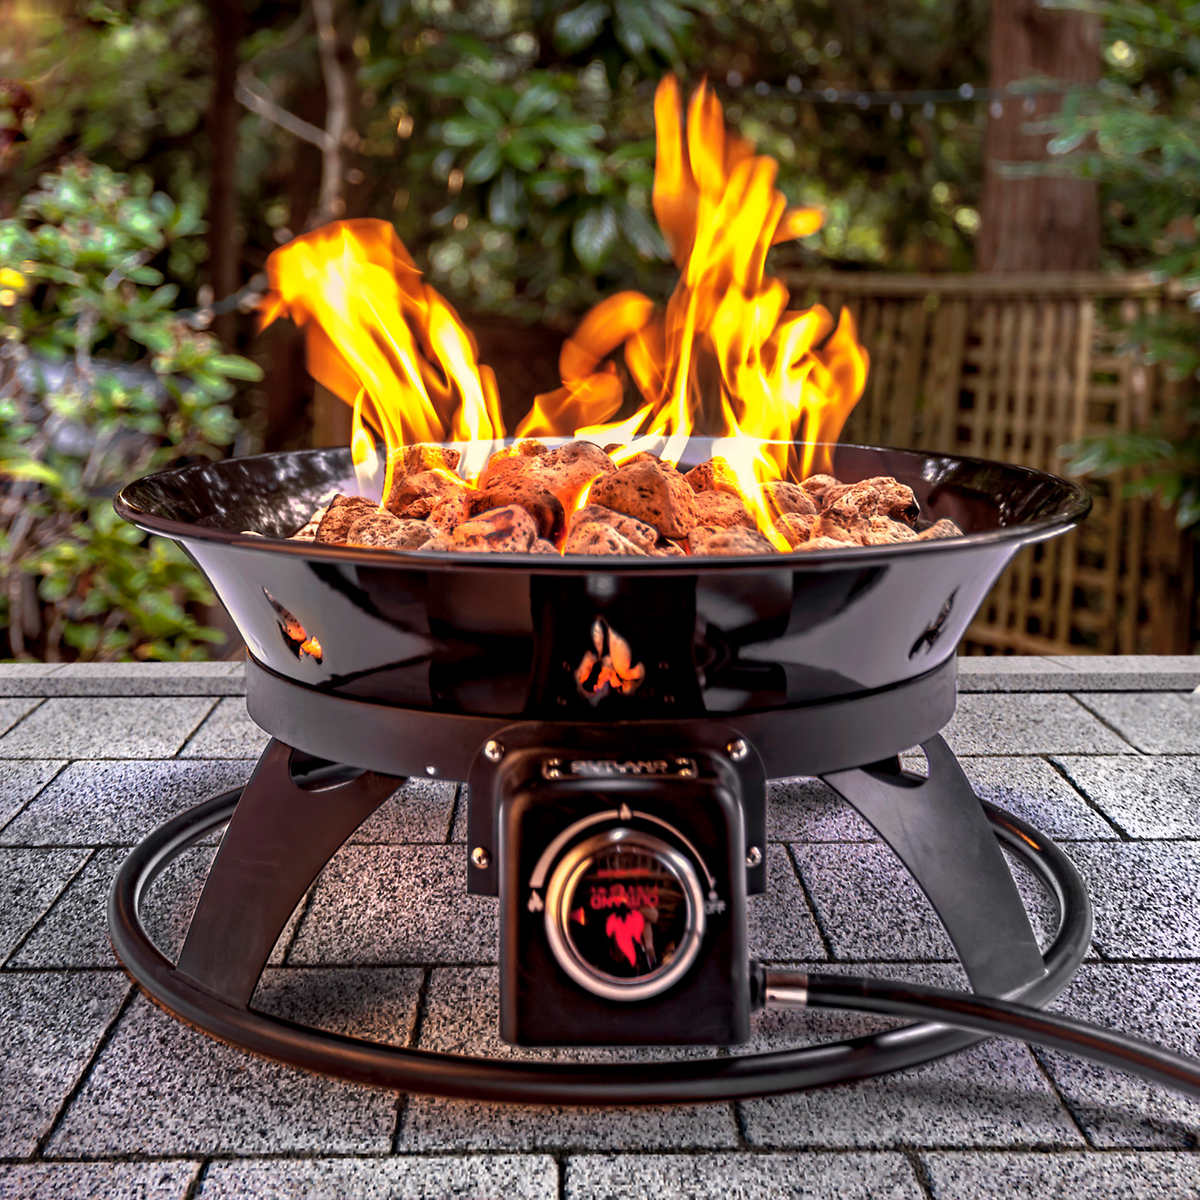 Outland Firebowl Outdoor Firepit Costco, Outdoor Camping Propane Fire Pit